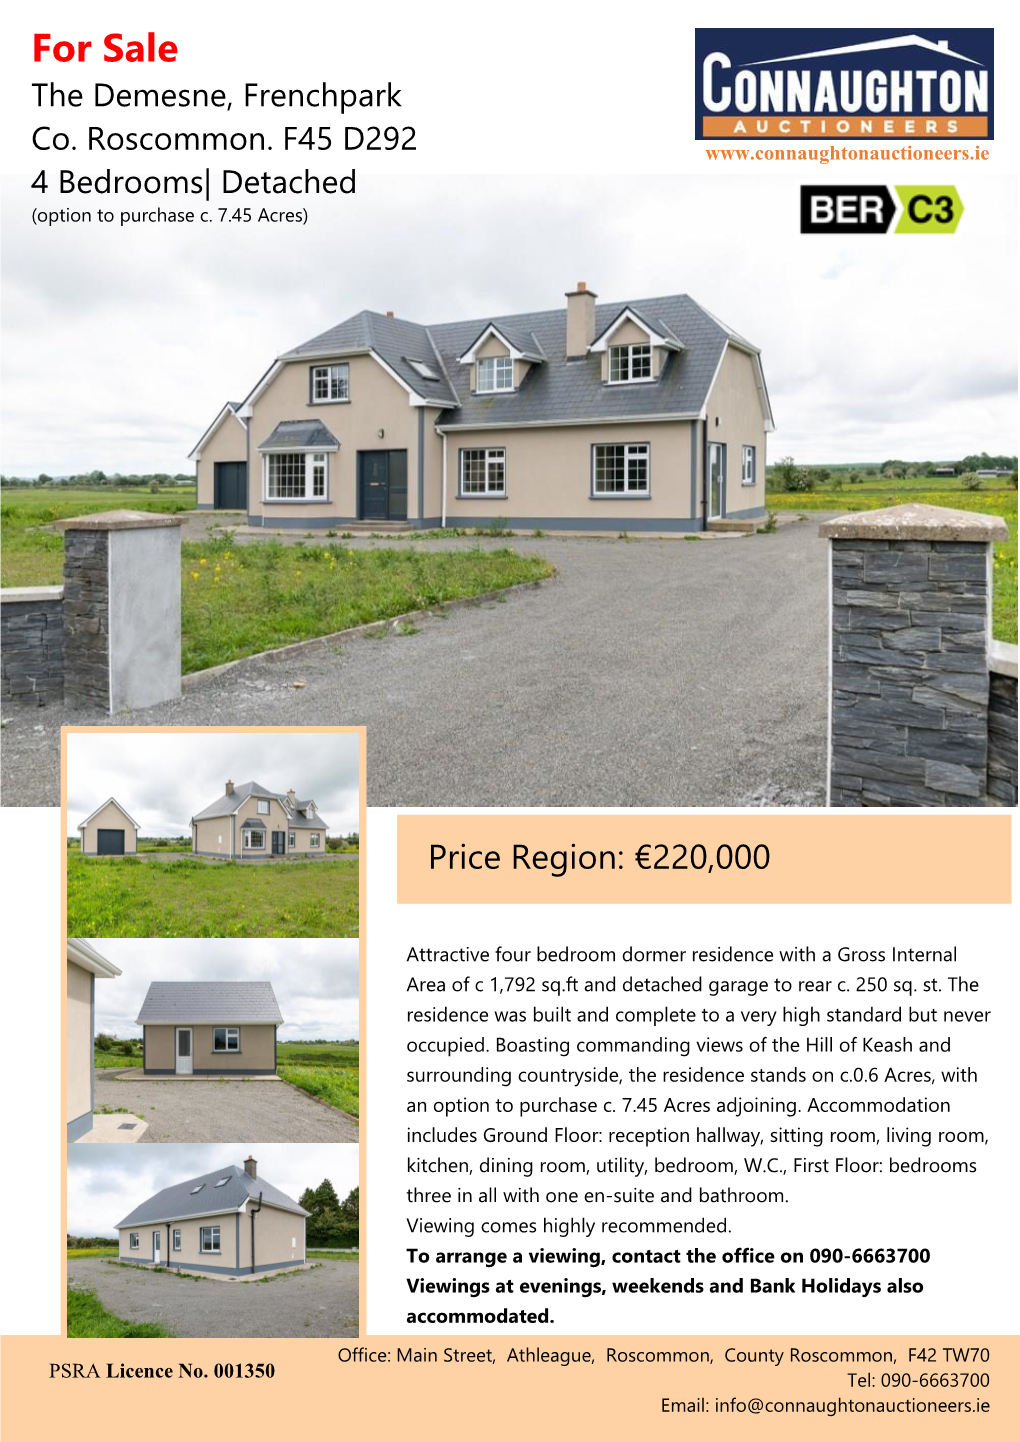 For Sale the Demesne, Frenchpark